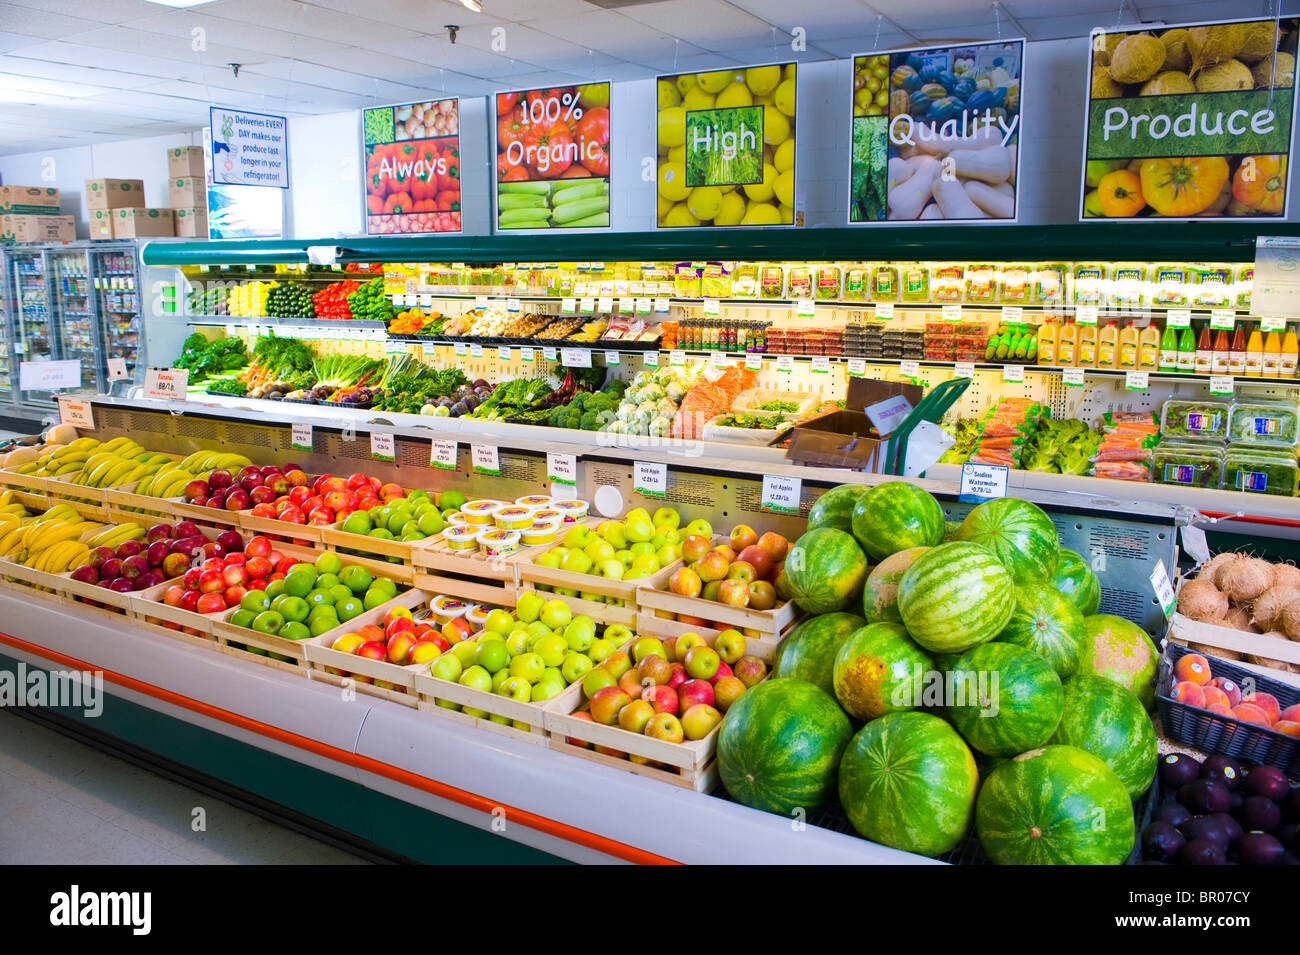 USA Maryland MD Organic only grocery store market natural foods and produce display Stock Photo